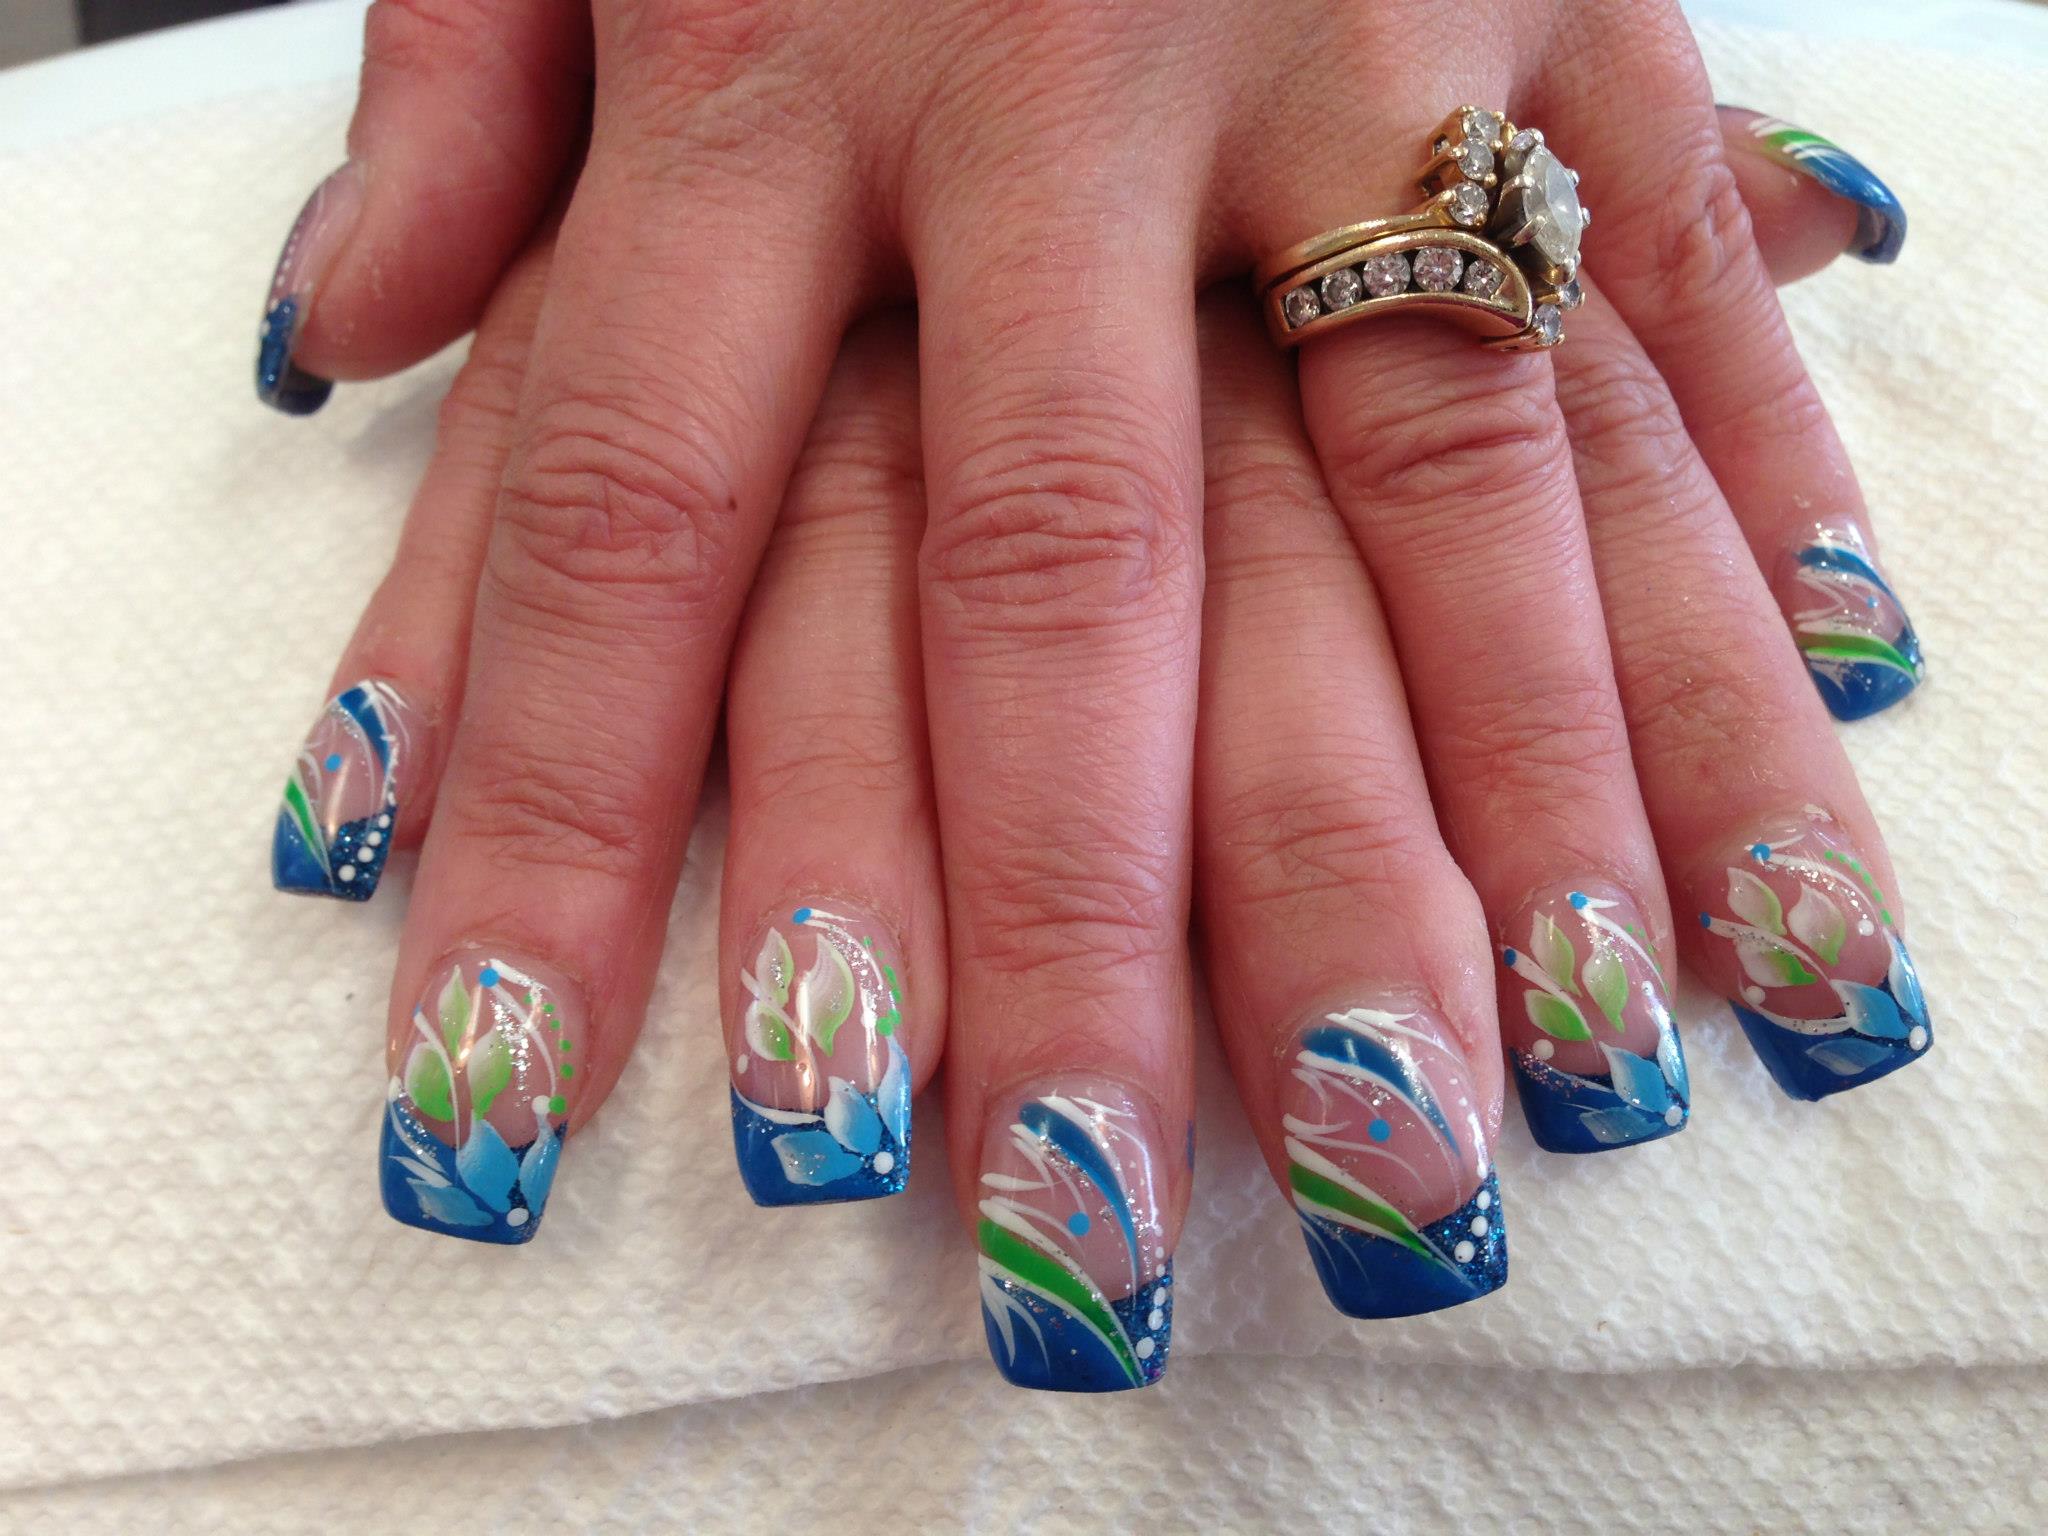 10. 60+ Beautiful Blue Nail Designs for Summer on Pinterest - wide 4